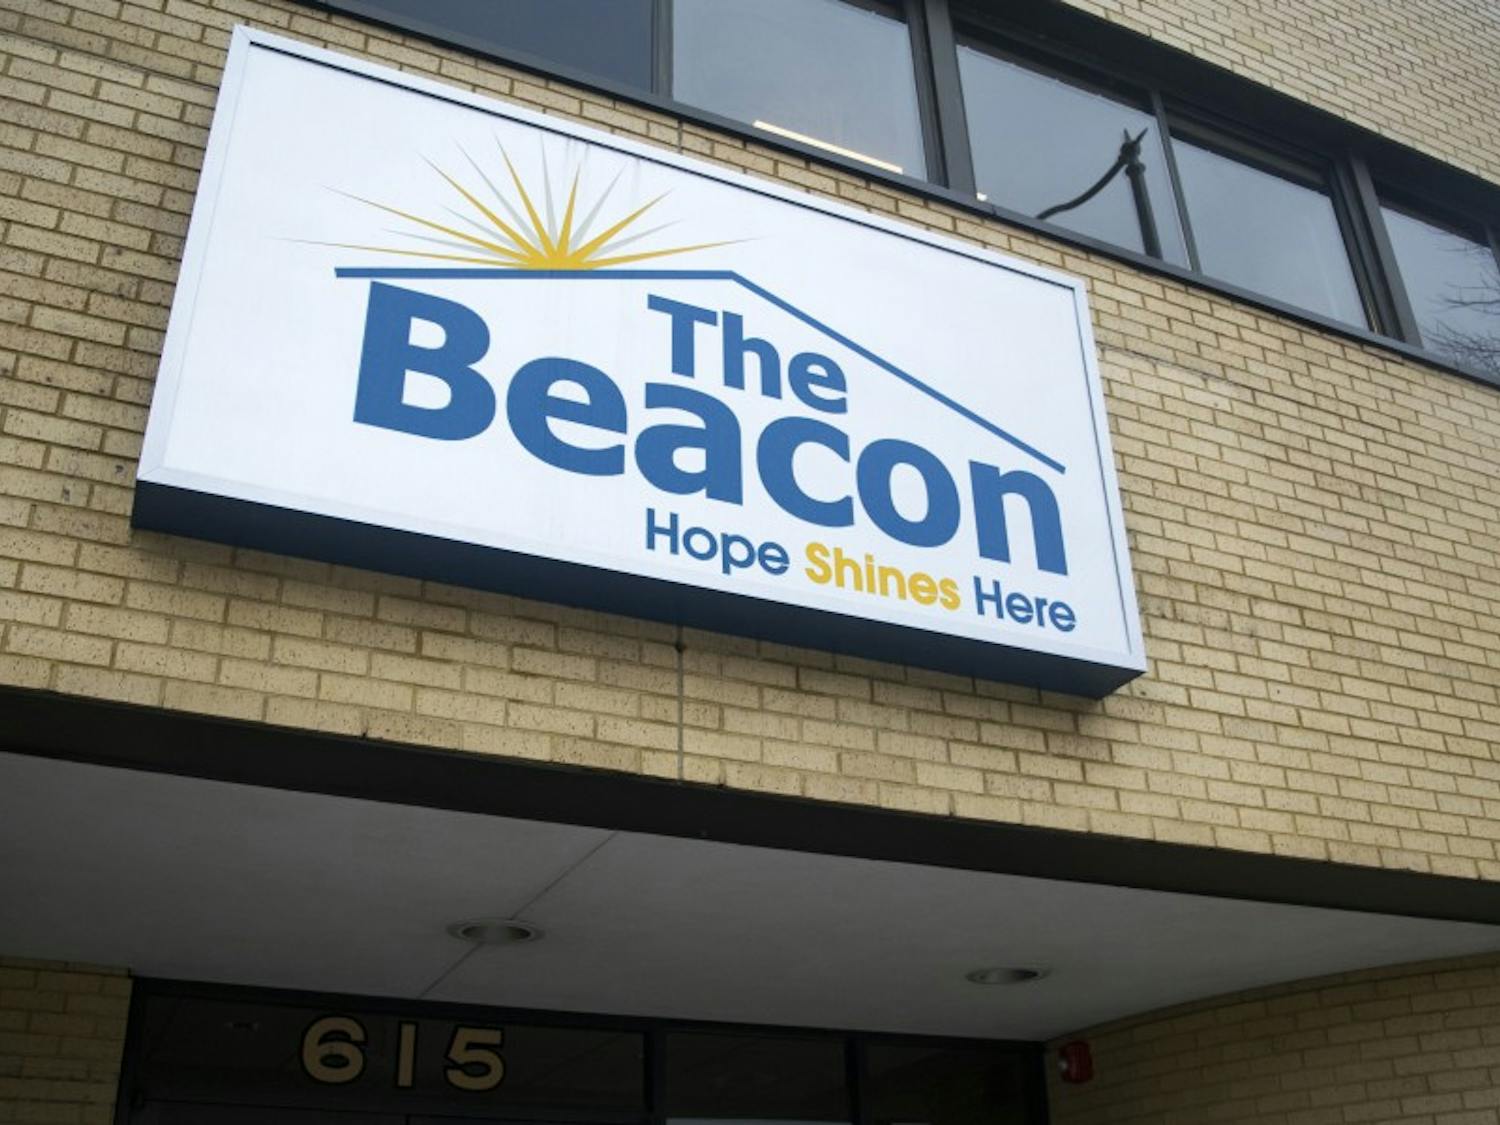 Around 90 people attended a forum at The Beacon Wednesday to discuss its services and ways it could improve community relations.